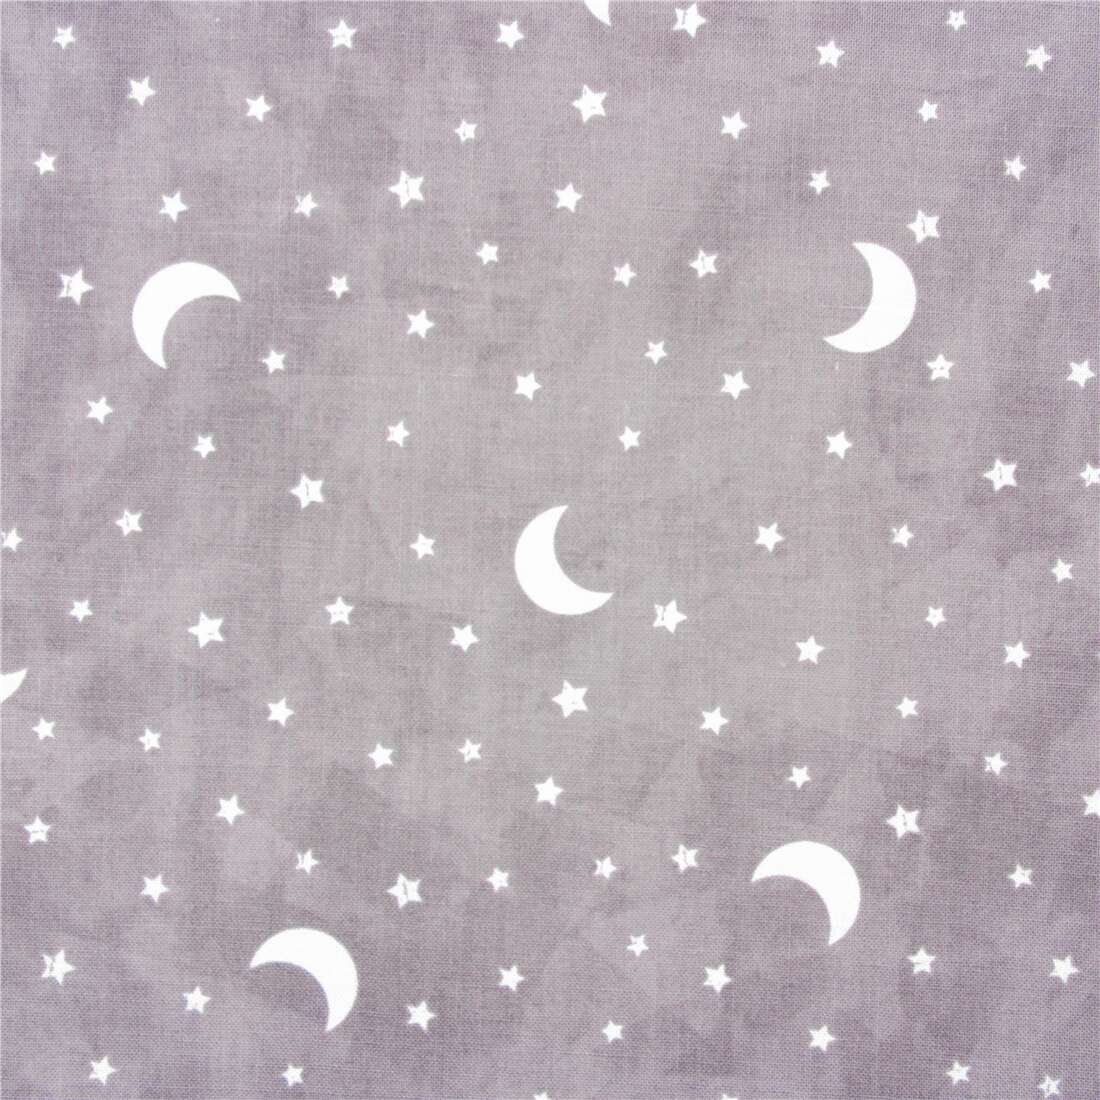 moon and stars Michael Miller grey cotton fabric astronomy night sky ...